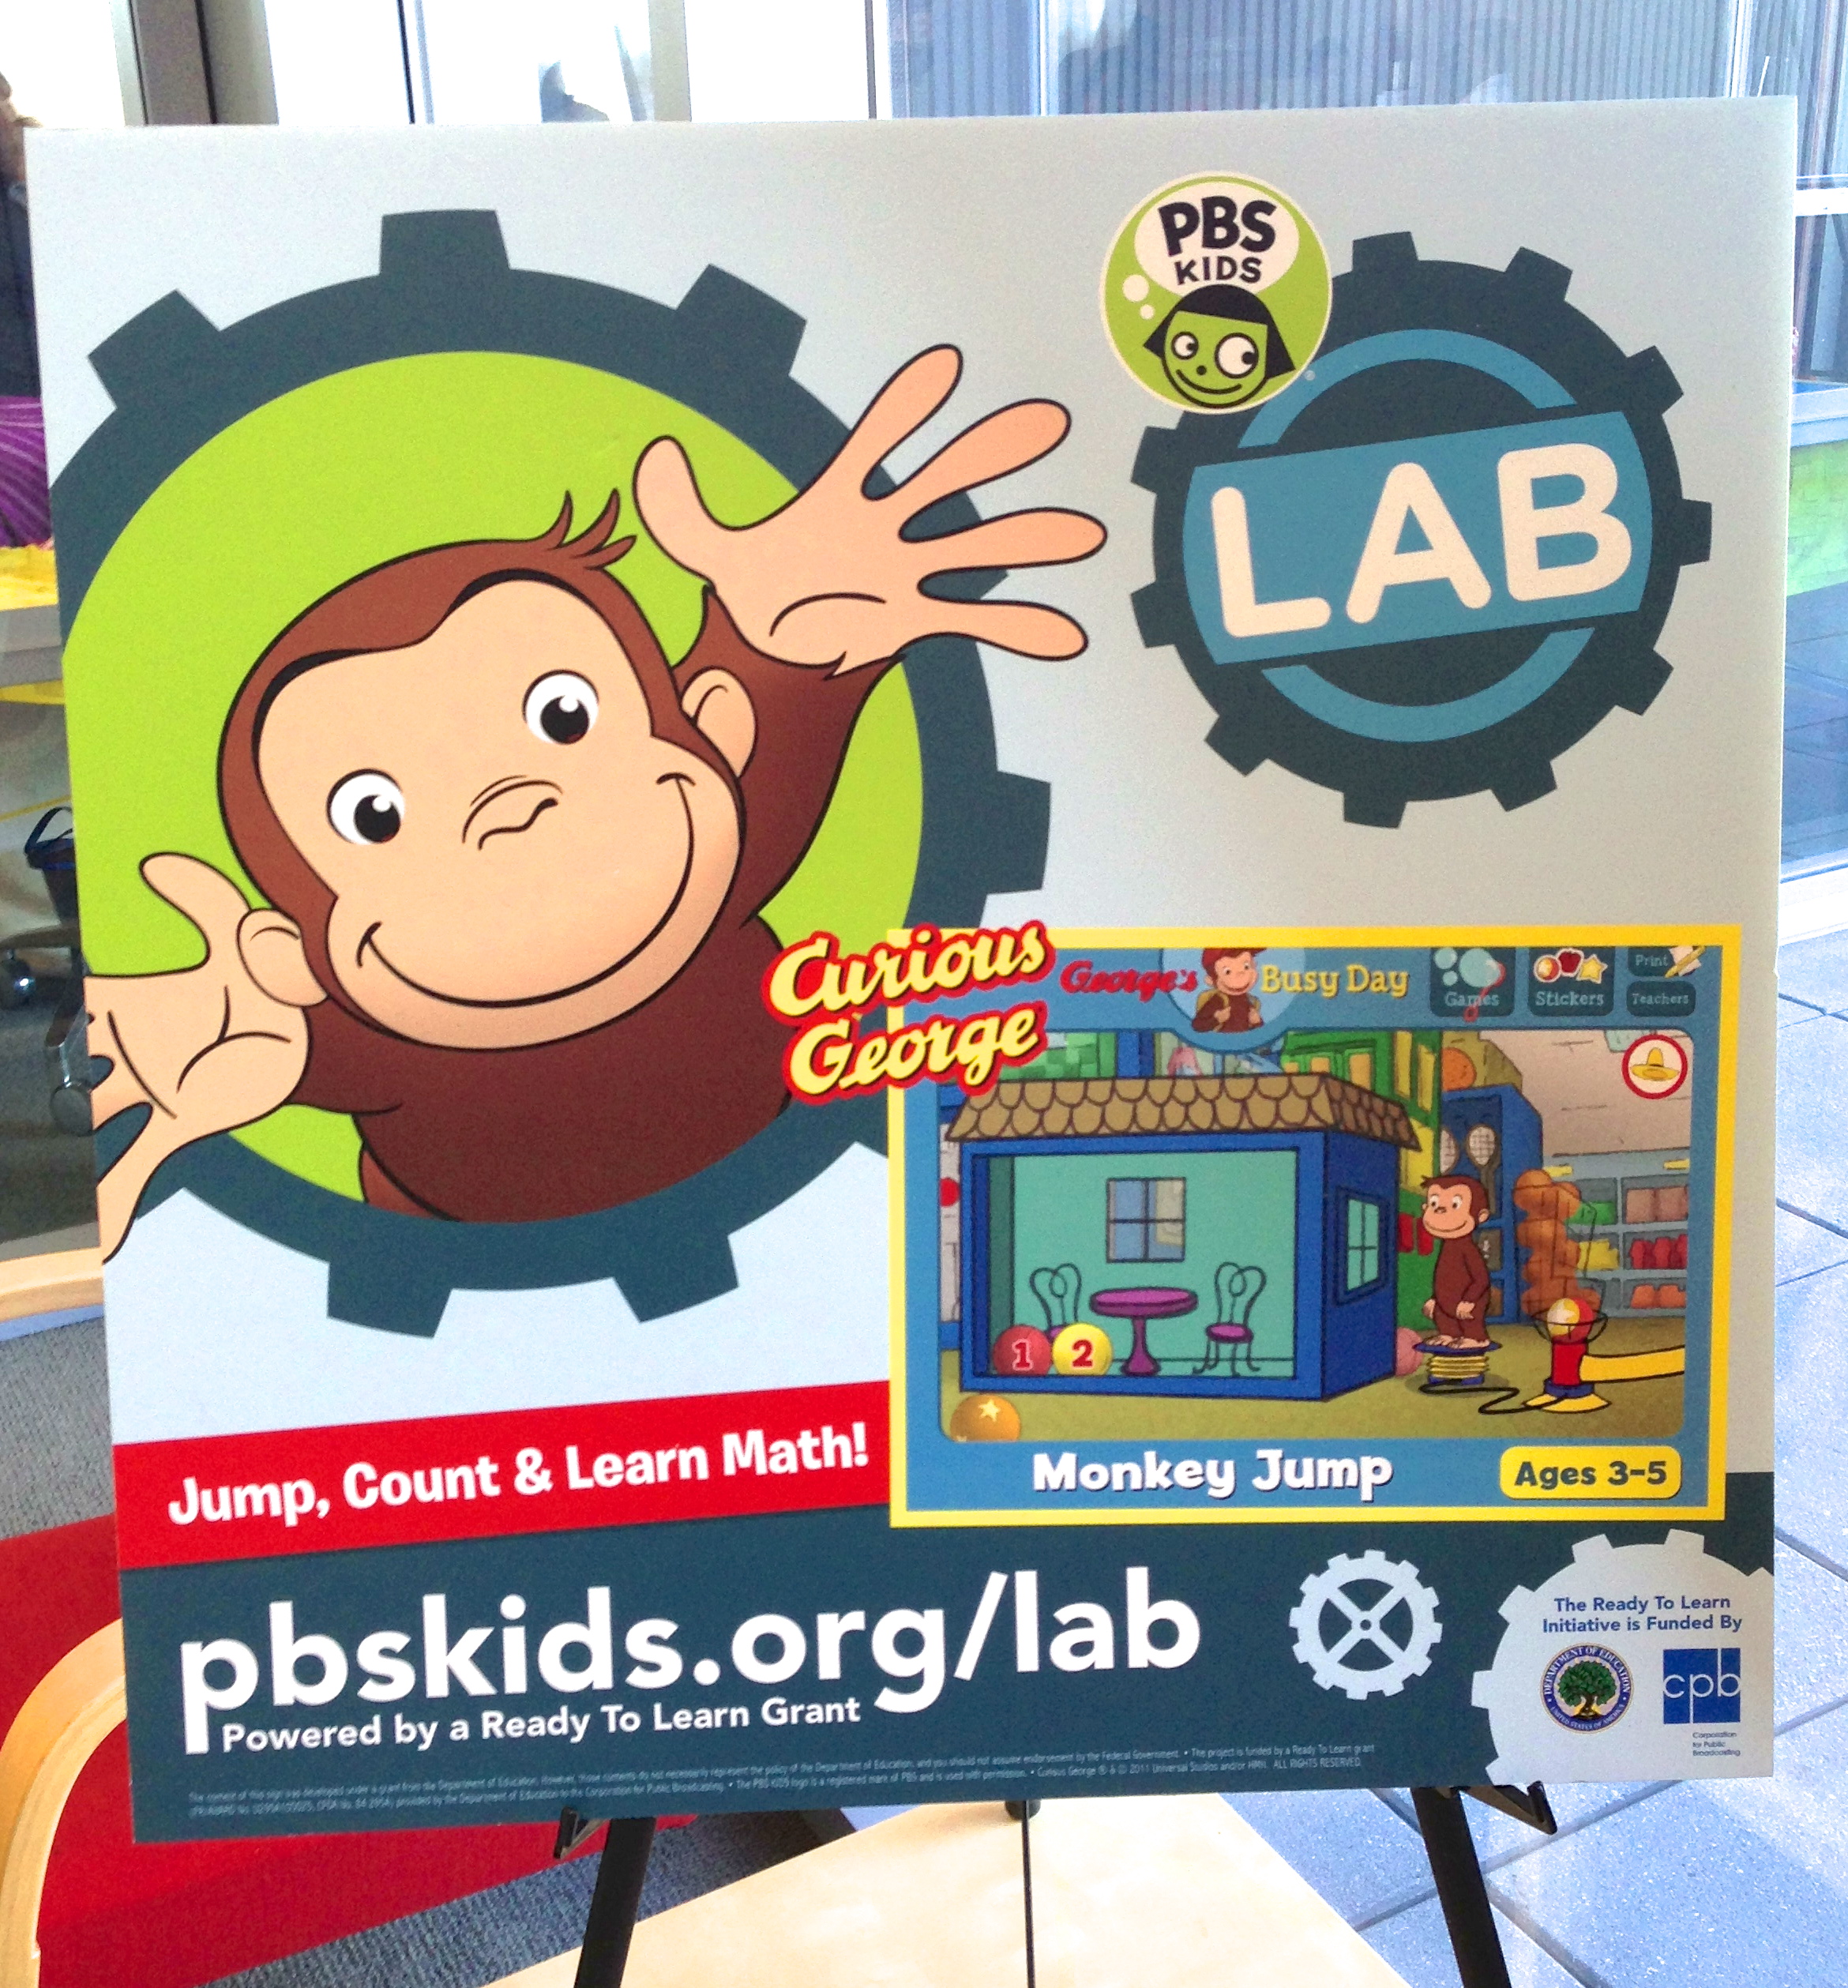 Pbs Kids Lab Apps And Games Review For